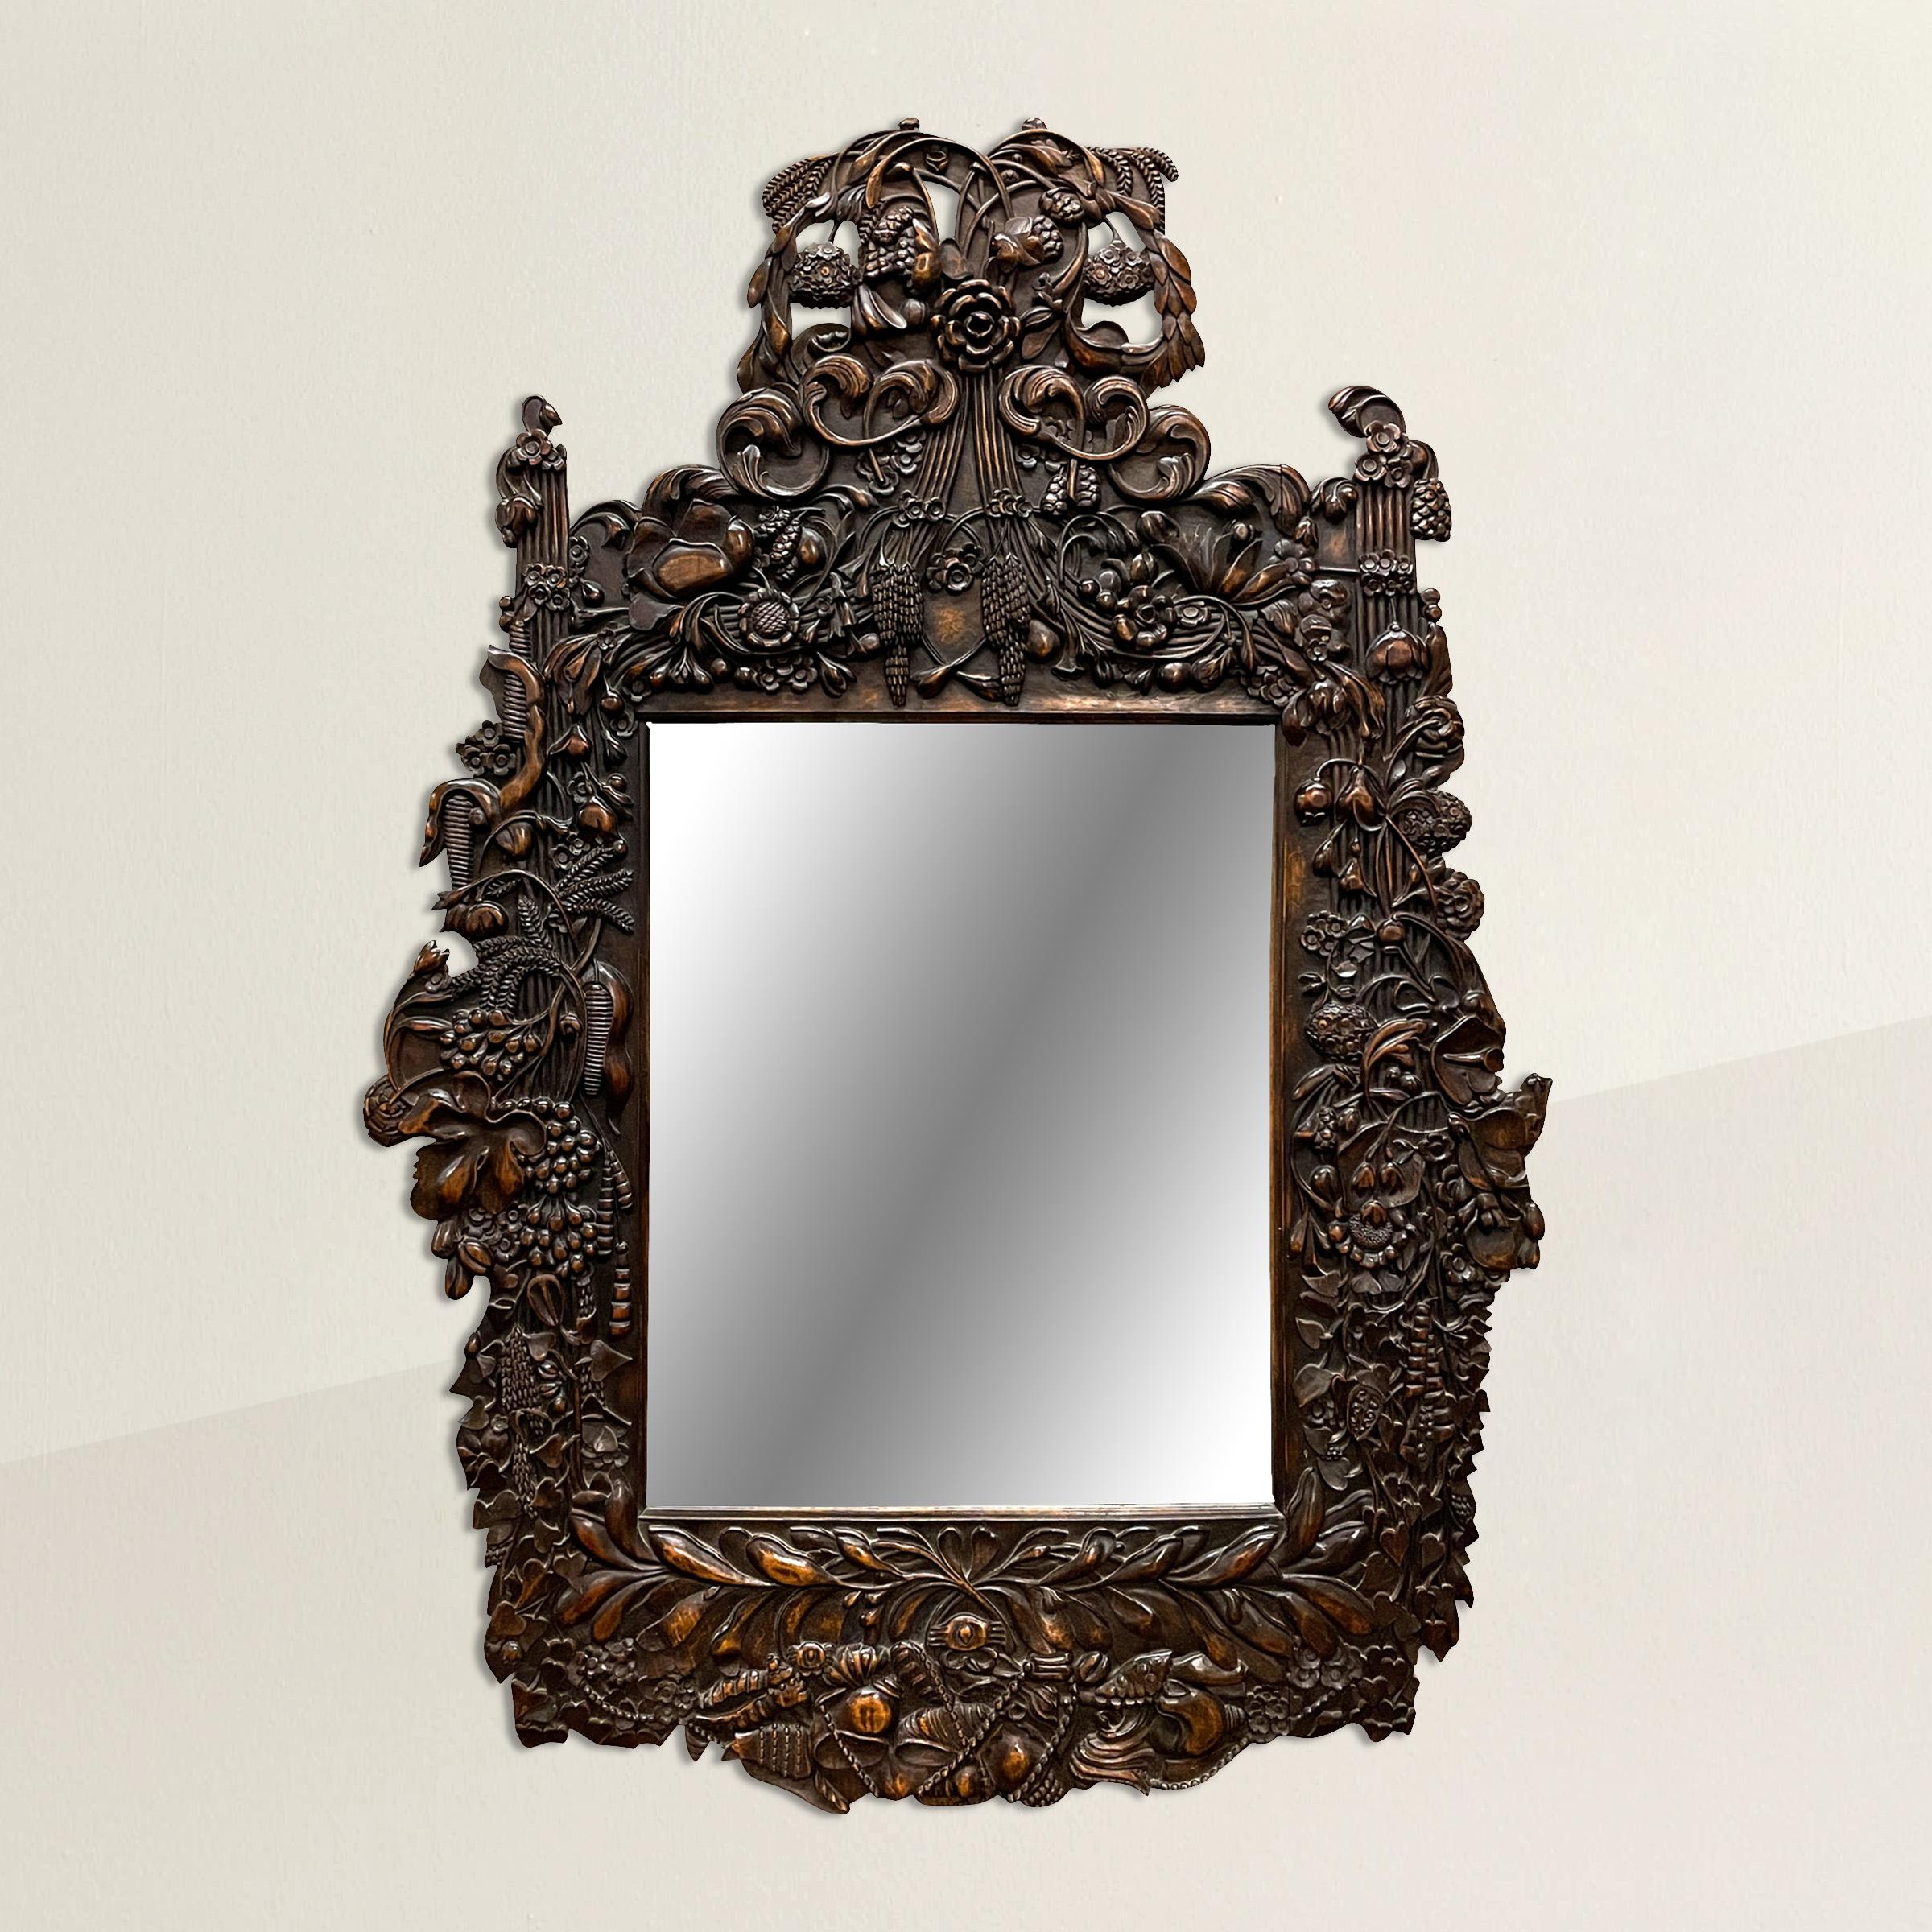 An incredible early 20th century Dutch mirror with the most wonderful hand-carved wood frame depicting myriad flowers including chrysanthemums, roses, and lotus, and other flora including sheafs of wheat, fig leaves, cattails, and ivy, and with a